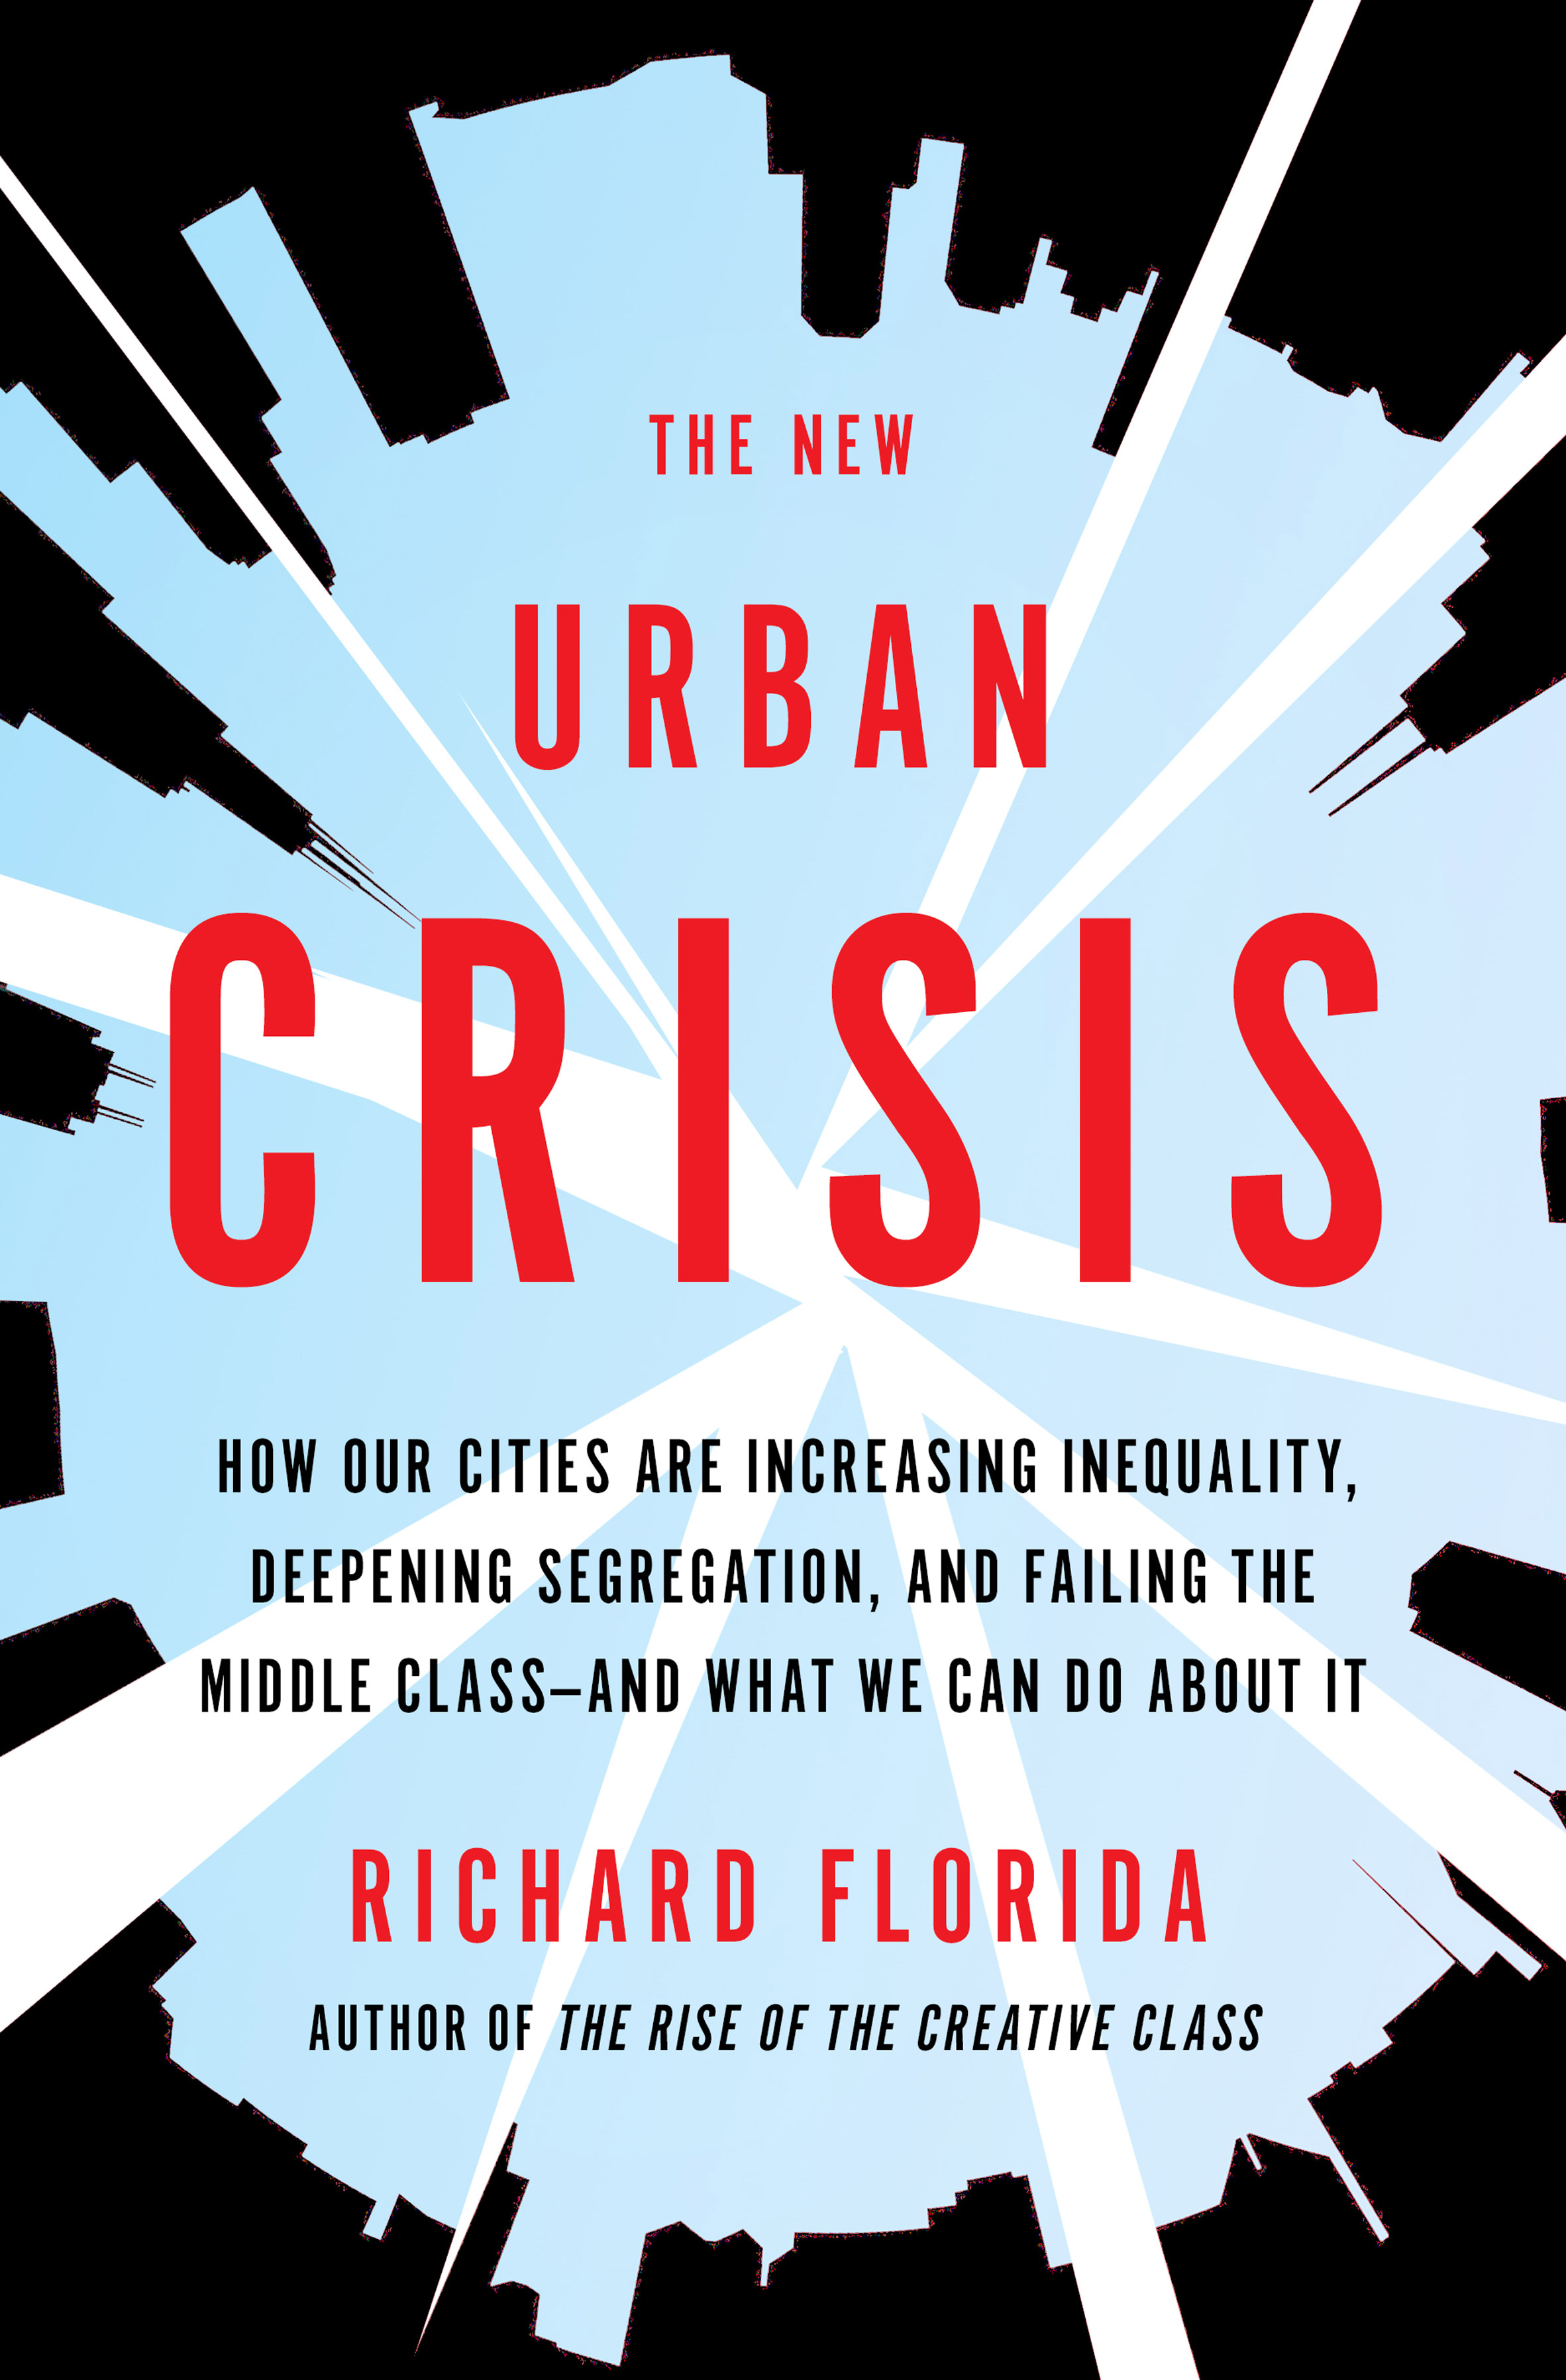 'The New Urban Crisis' is Richard Florida's newest book release on urbanisation and inequality.